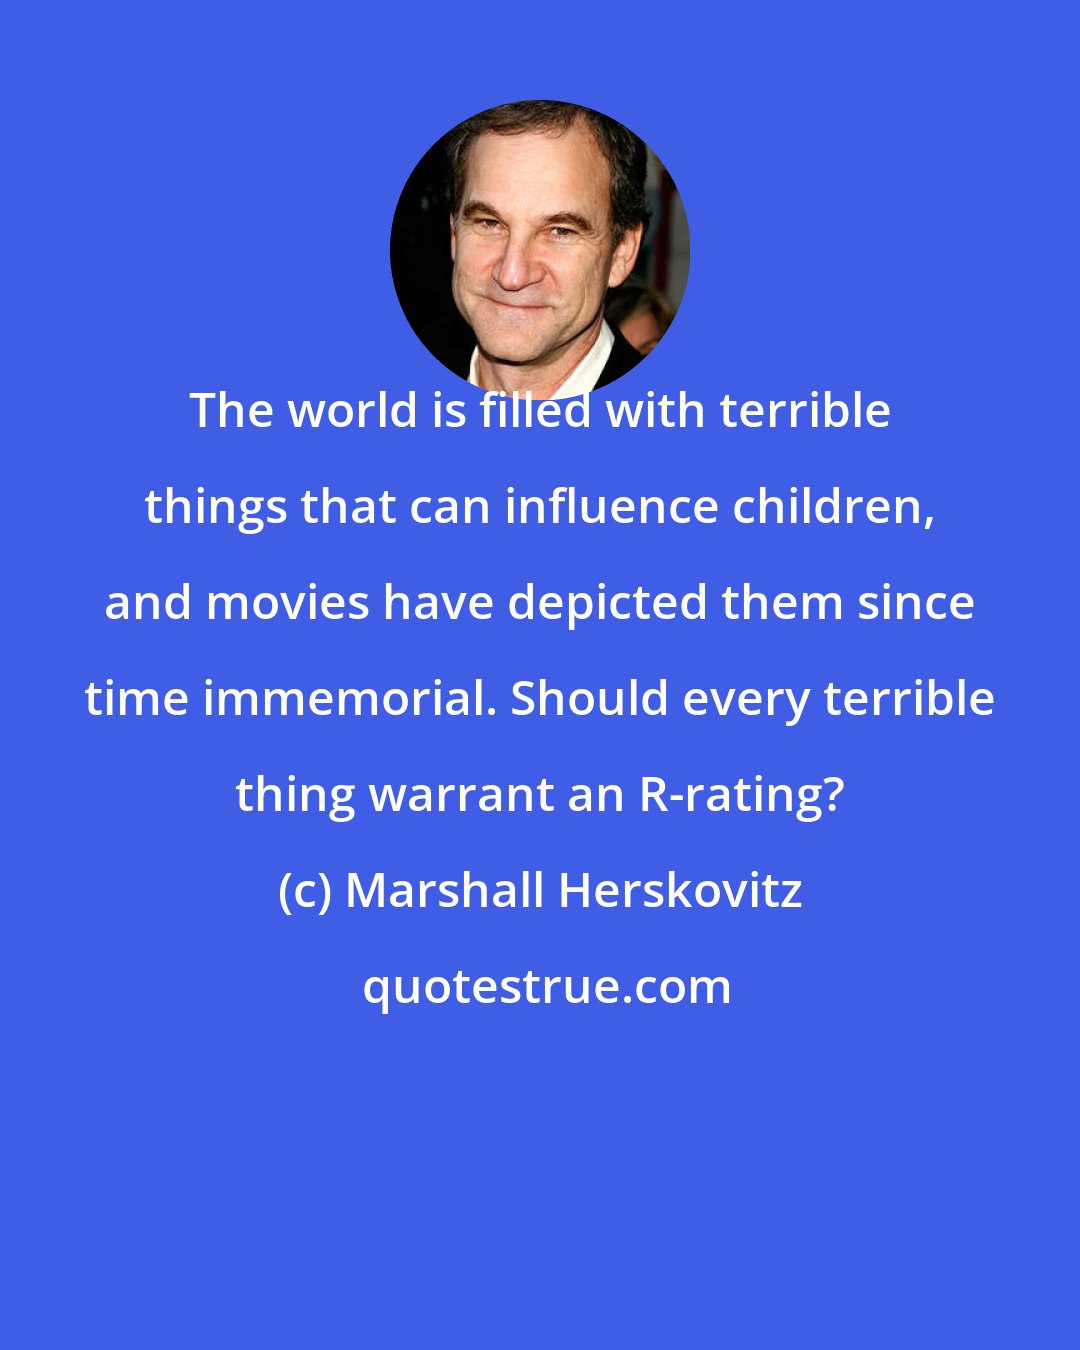 Marshall Herskovitz: The world is filled with terrible things that can influence children, and movies have depicted them since time immemorial. Should every terrible thing warrant an R-rating?